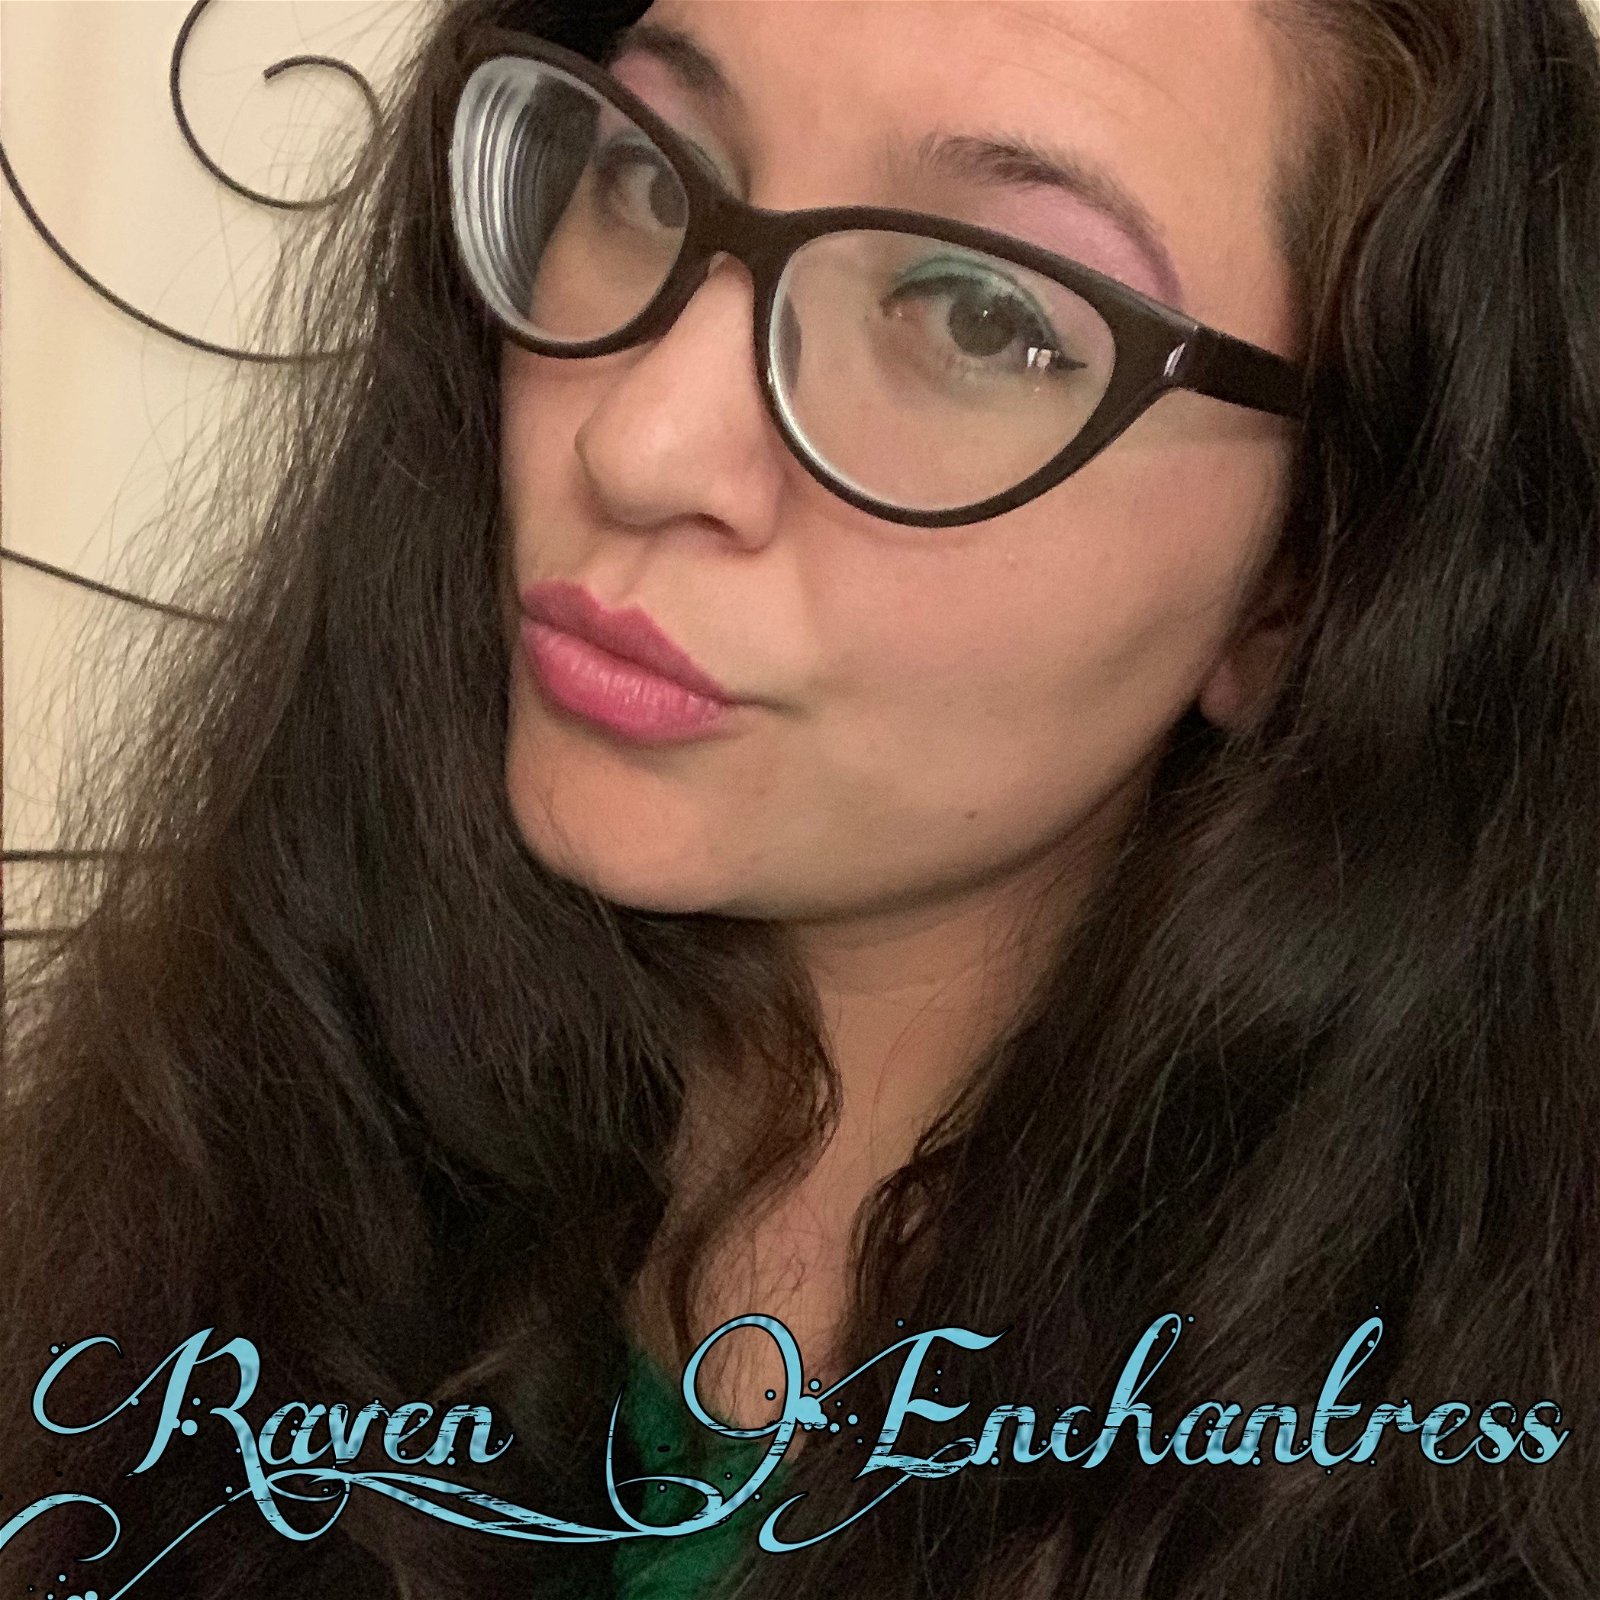 Photo by Raven_Enchantress with the username @curvyraven, who is a star user,  March 17, 2020 at 5:10 AM. The post is about the topic SFW Faces and the text says 'This is my favorite #selfie, today. Rocking the care-free attitude.
I have been putting together a lot of content these past few days!!! Now i just need to catch up on watermarking my photos!!!

#SFW #beauty #glasses #work #grinding..'